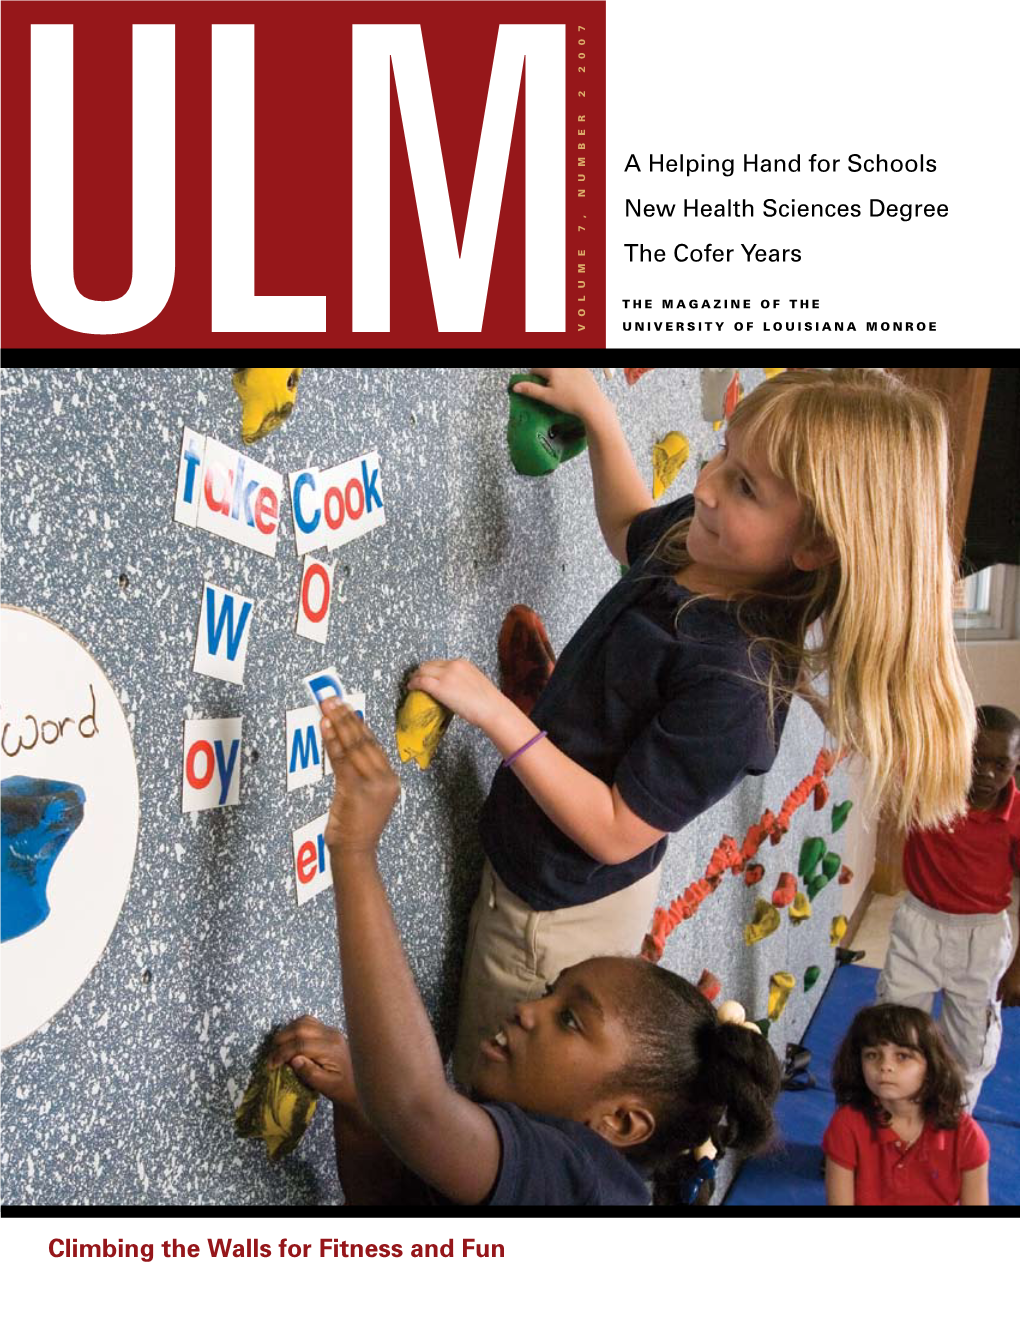 Climbing the Walls for Fitness and Fun S I Look Back Over Our Five Years at ULM, I Am Inspired by the Tremendous Accomplishments a We Have Achieved Together